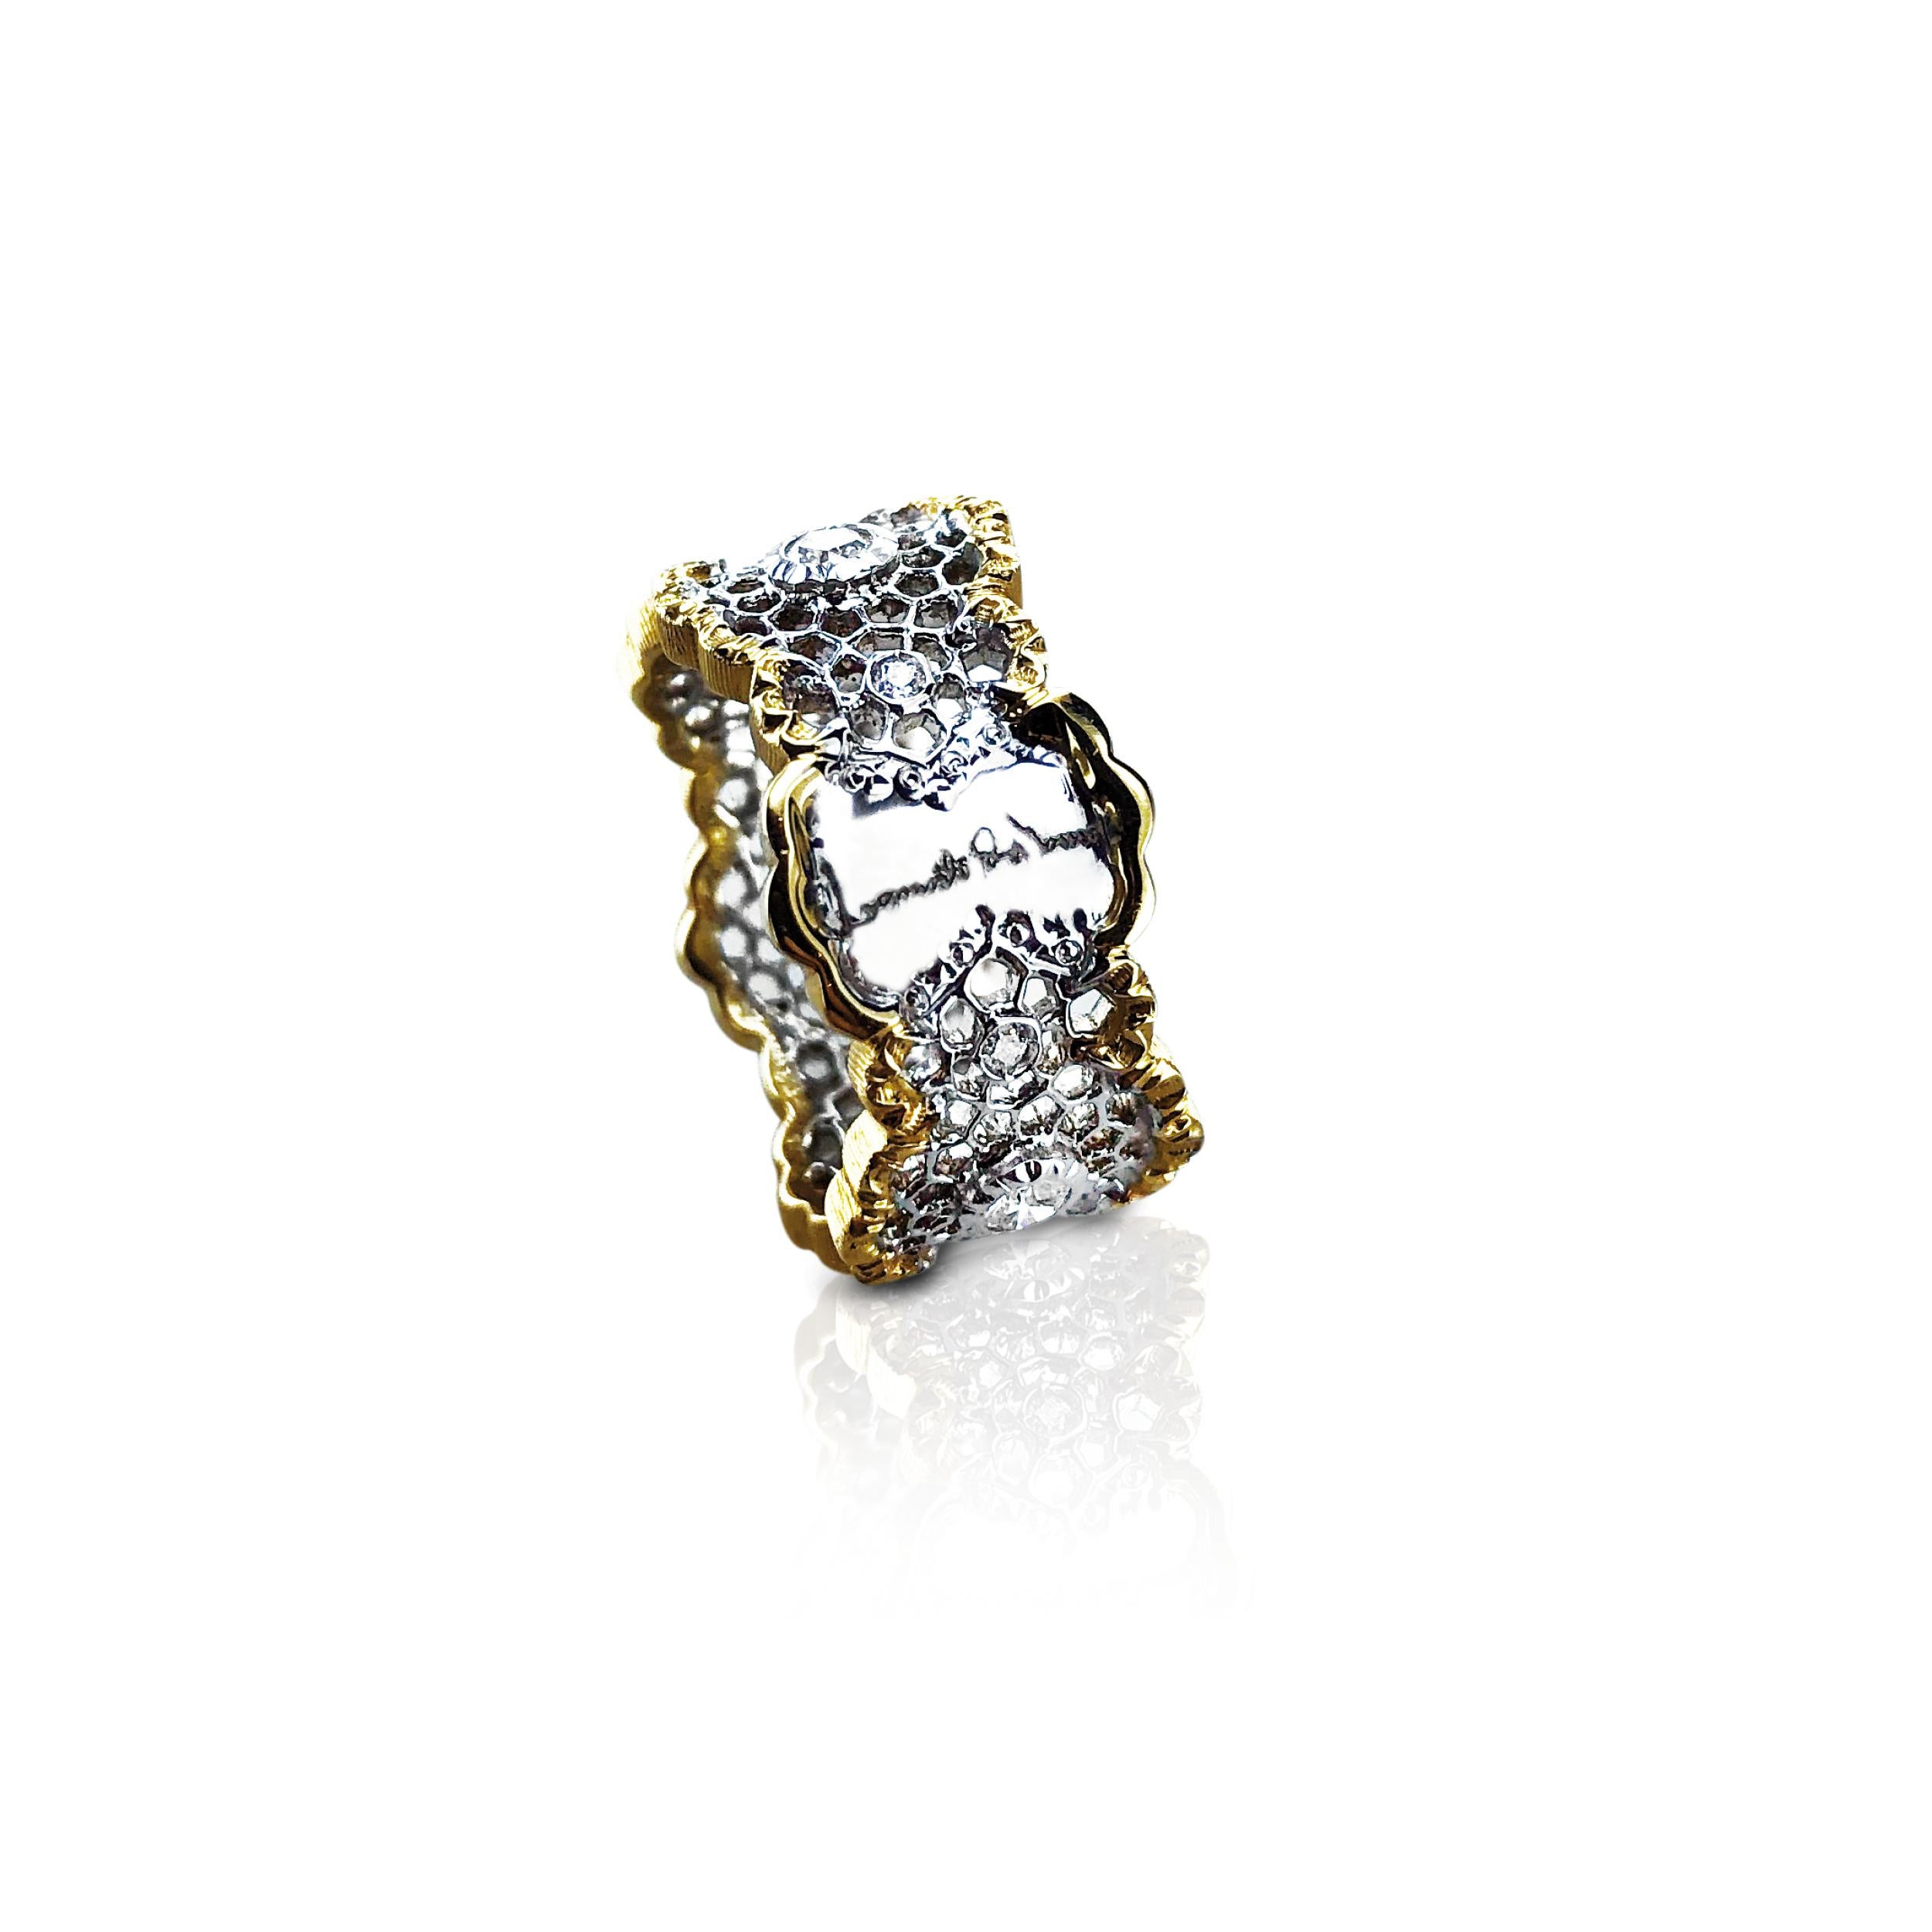 This white and yellow Gold 18Kt Cecilia diamond Ring, was designed and inspired by Leonardo da Vinci drawings, and is sprinkled with the internationally patented Leonardo da Vinci Cut diamond. 

The diamond cut incorporates the Divine Proportion and